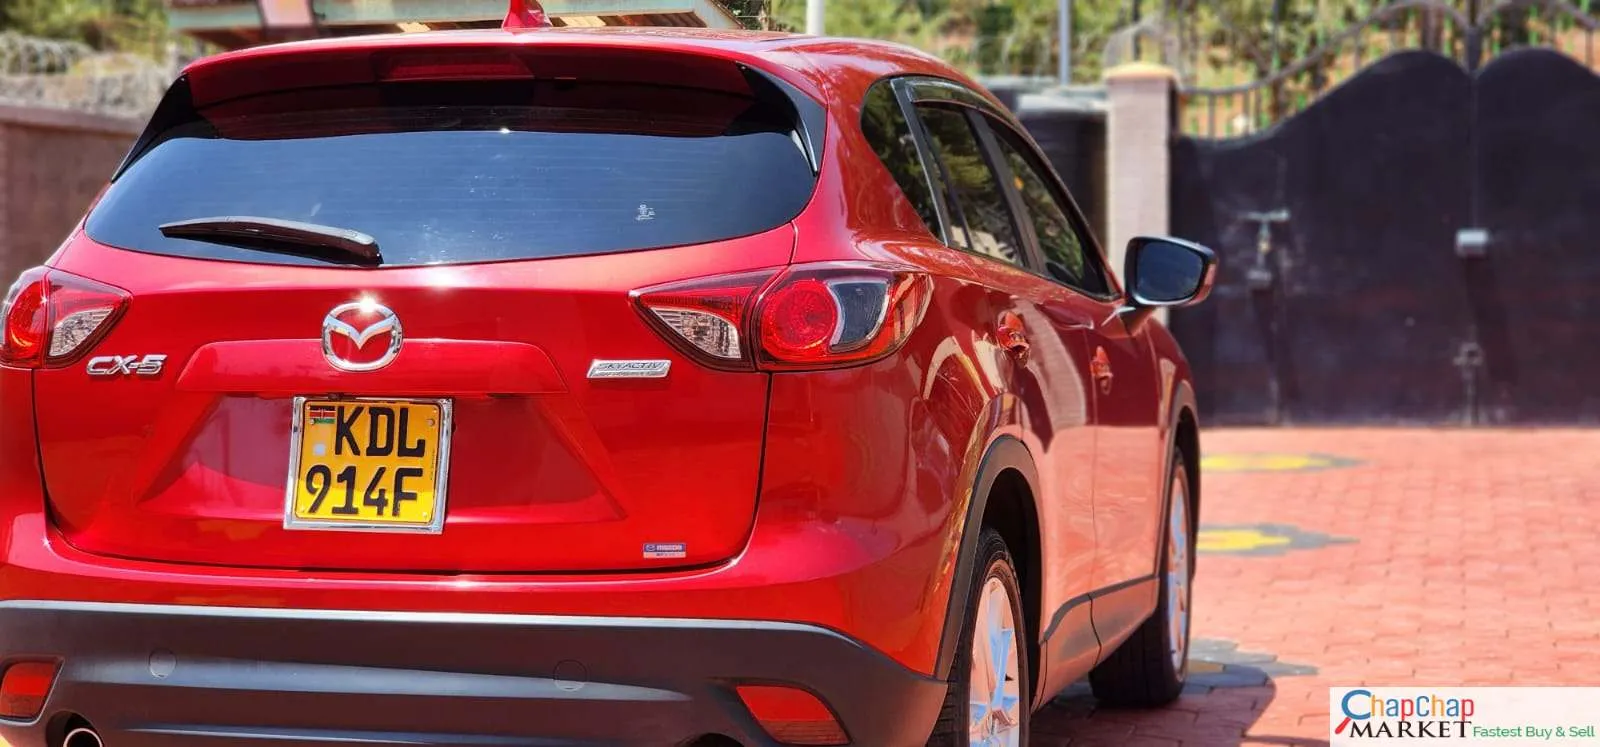 Mazda CX-5 CX5 kenya You Pay 20% DEPOSIT TRADE IN OK cx5 for sale in kenya hire purchase installments EXCLUSIVE